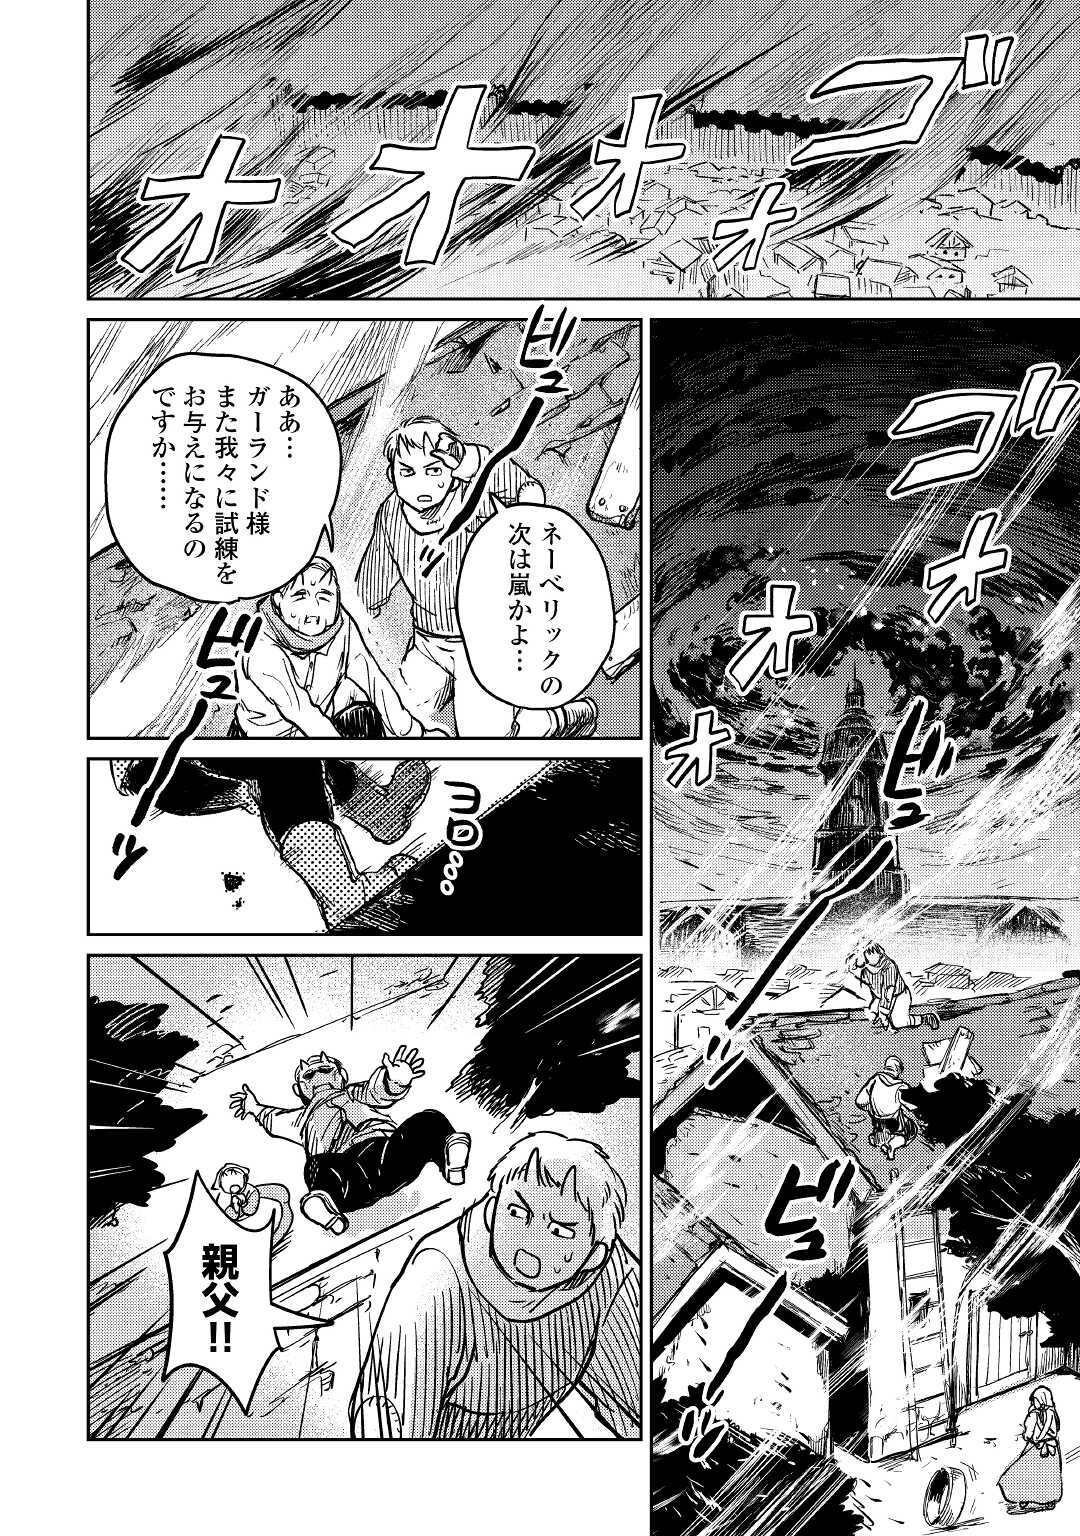 The Former Structural Researcher’s Story of Otherworldly Adventure 第40話 - Page 2